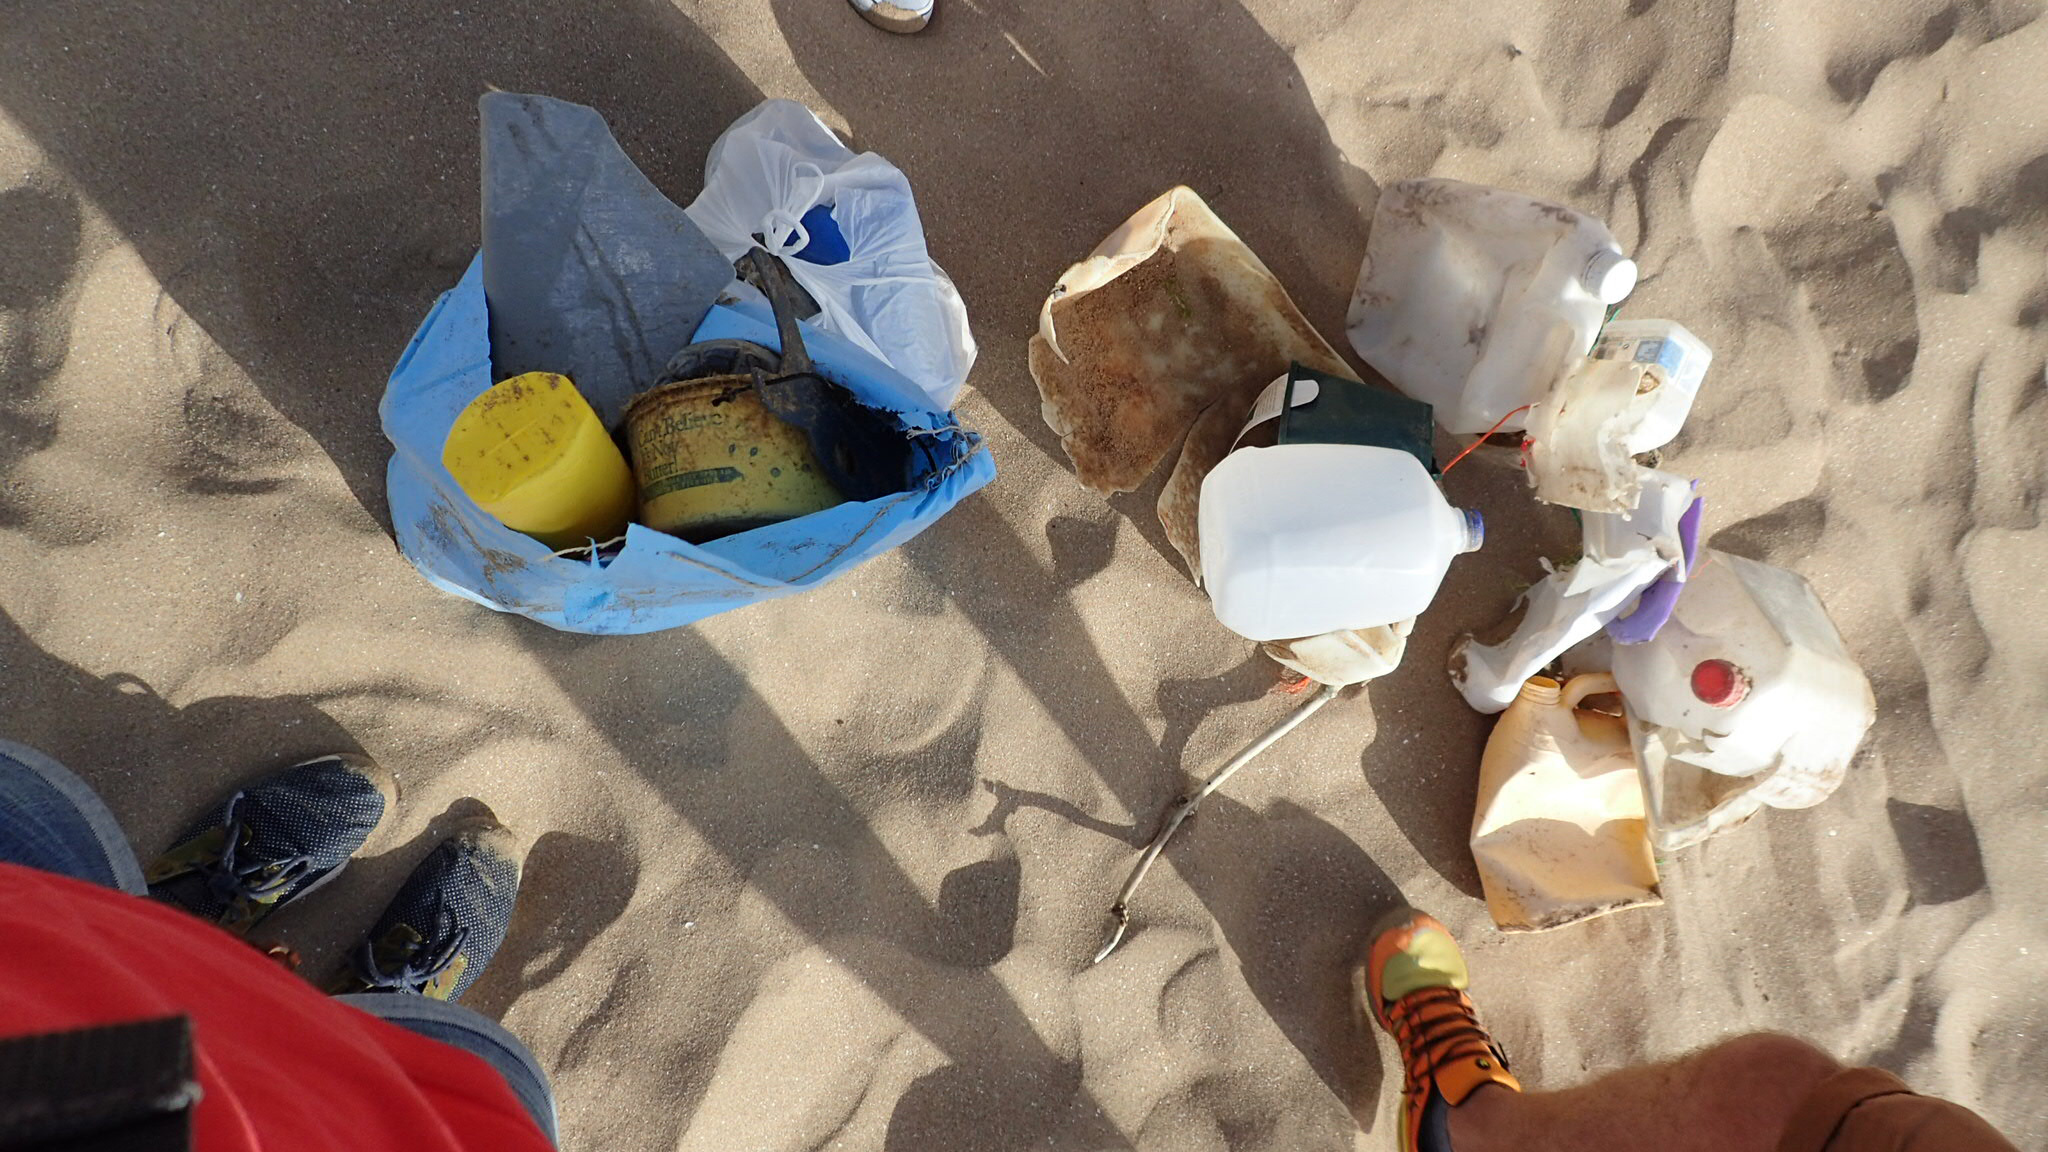 The collection of plastic picked up between Putsborough and Woolacombe